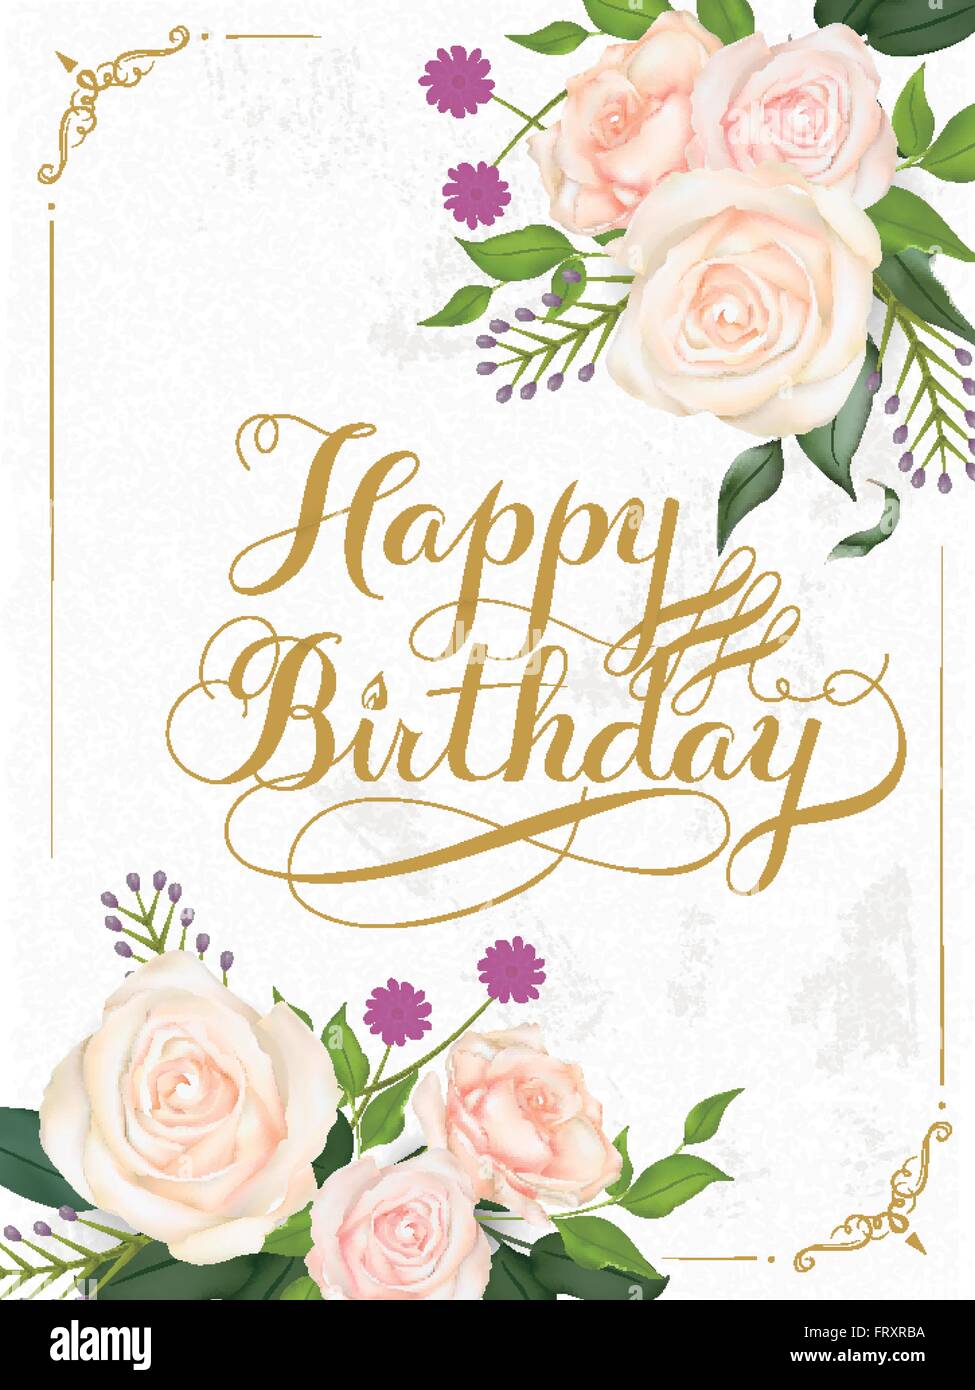 Romantic Happy Birthday Calligraphy Design With Floral Elements Stock Vector Image Art Alamy